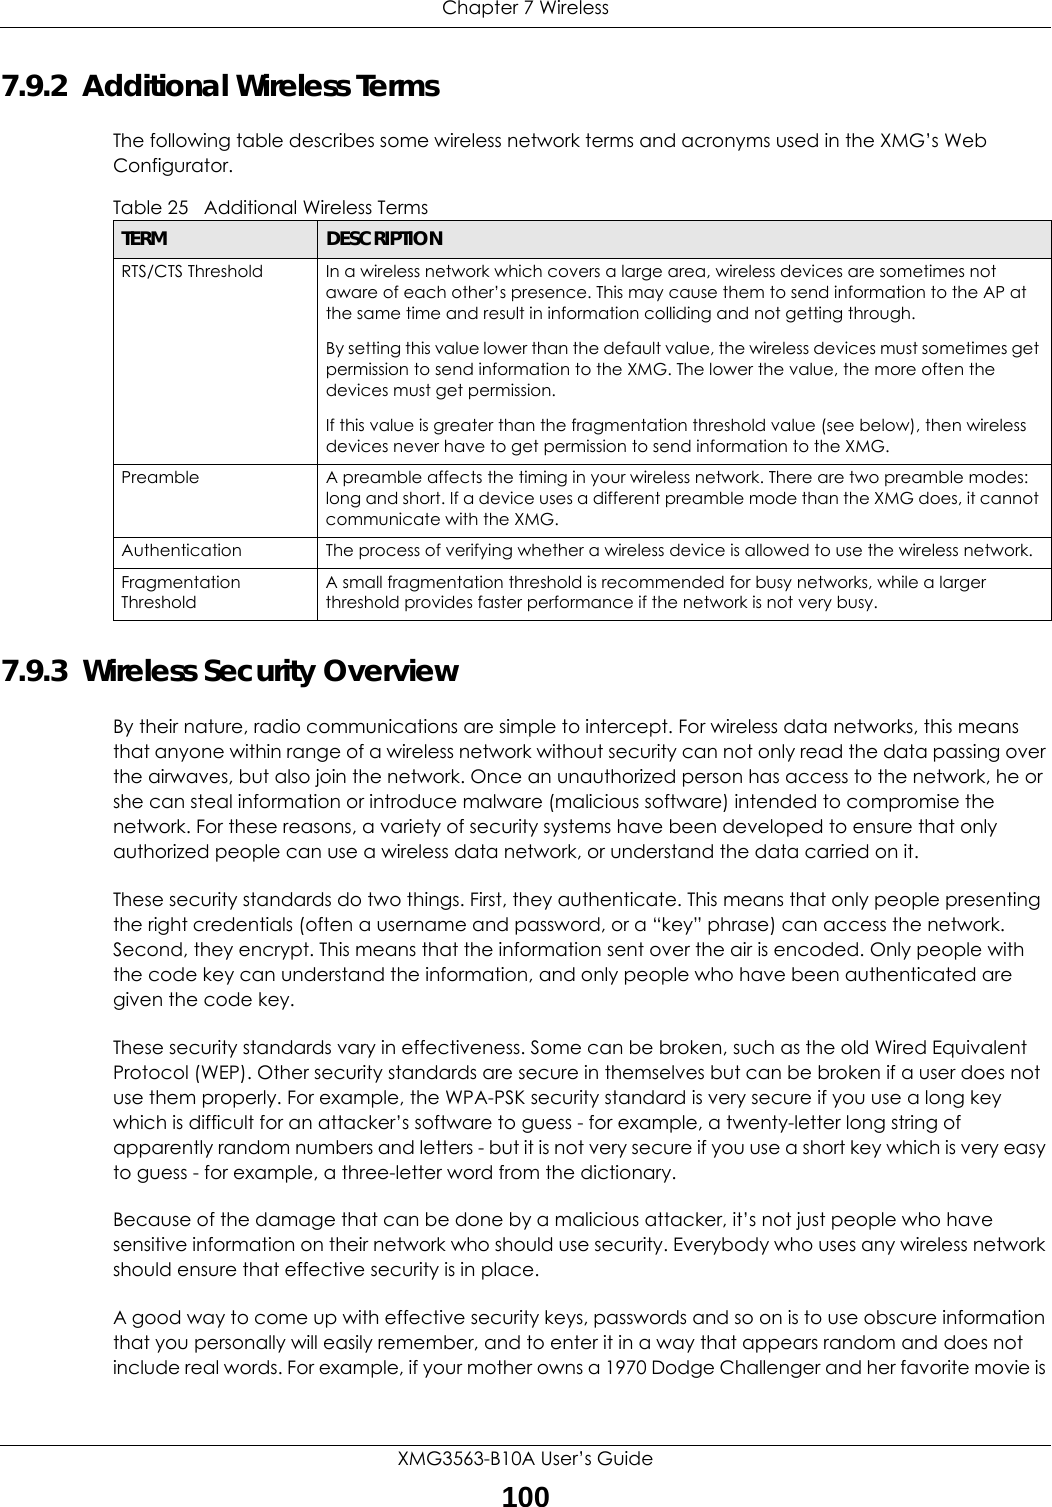 Chapter 7 WirelessXMG3563-B10A User’s Guide1007.9.2  Additional Wireless TermsThe following table describes some wireless network terms and acronyms used in the XMG’s Web Configurator.7.9.3  Wireless Security OverviewBy their nature, radio communications are simple to intercept. For wireless data networks, this means that anyone within range of a wireless network without security can not only read the data passing over the airwaves, but also join the network. Once an unauthorized person has access to the network, he or she can steal information or introduce malware (malicious software) intended to compromise the network. For these reasons, a variety of security systems have been developed to ensure that only authorized people can use a wireless data network, or understand the data carried on it.These security standards do two things. First, they authenticate. This means that only people presenting the right credentials (often a username and password, or a “key” phrase) can access the network. Second, they encrypt. This means that the information sent over the air is encoded. Only people with the code key can understand the information, and only people who have been authenticated are given the code key.These security standards vary in effectiveness. Some can be broken, such as the old Wired Equivalent Protocol (WEP). Other security standards are secure in themselves but can be broken if a user does not use them properly. For example, the WPA-PSK security standard is very secure if you use a long key which is difficult for an attacker’s software to guess - for example, a twenty-letter long string of apparently random numbers and letters - but it is not very secure if you use a short key which is very easy to guess - for example, a three-letter word from the dictionary.Because of the damage that can be done by a malicious attacker, it’s not just people who have sensitive information on their network who should use security. Everybody who uses any wireless network should ensure that effective security is in place.A good way to come up with effective security keys, passwords and so on is to use obscure information that you personally will easily remember, and to enter it in a way that appears random and does not include real words. For example, if your mother owns a 1970 Dodge Challenger and her favorite movie is Table 25   Additional Wireless TermsTERM DESCRIPTIONRTS/CTS Threshold In a wireless network which covers a large area, wireless devices are sometimes not aware of each other’s presence. This may cause them to send information to the AP at the same time and result in information colliding and not getting through.By setting this value lower than the default value, the wireless devices must sometimes get permission to send information to the XMG. The lower the value, the more often the devices must get permission.If this value is greater than the fragmentation threshold value (see below), then wireless devices never have to get permission to send information to the XMG.Preamble A preamble affects the timing in your wireless network. There are two preamble modes: long and short. If a device uses a different preamble mode than the XMG does, it cannot communicate with the XMG.Authentication The process of verifying whether a wireless device is allowed to use the wireless network.Fragmentation ThresholdA small fragmentation threshold is recommended for busy networks, while a larger threshold provides faster performance if the network is not very busy.